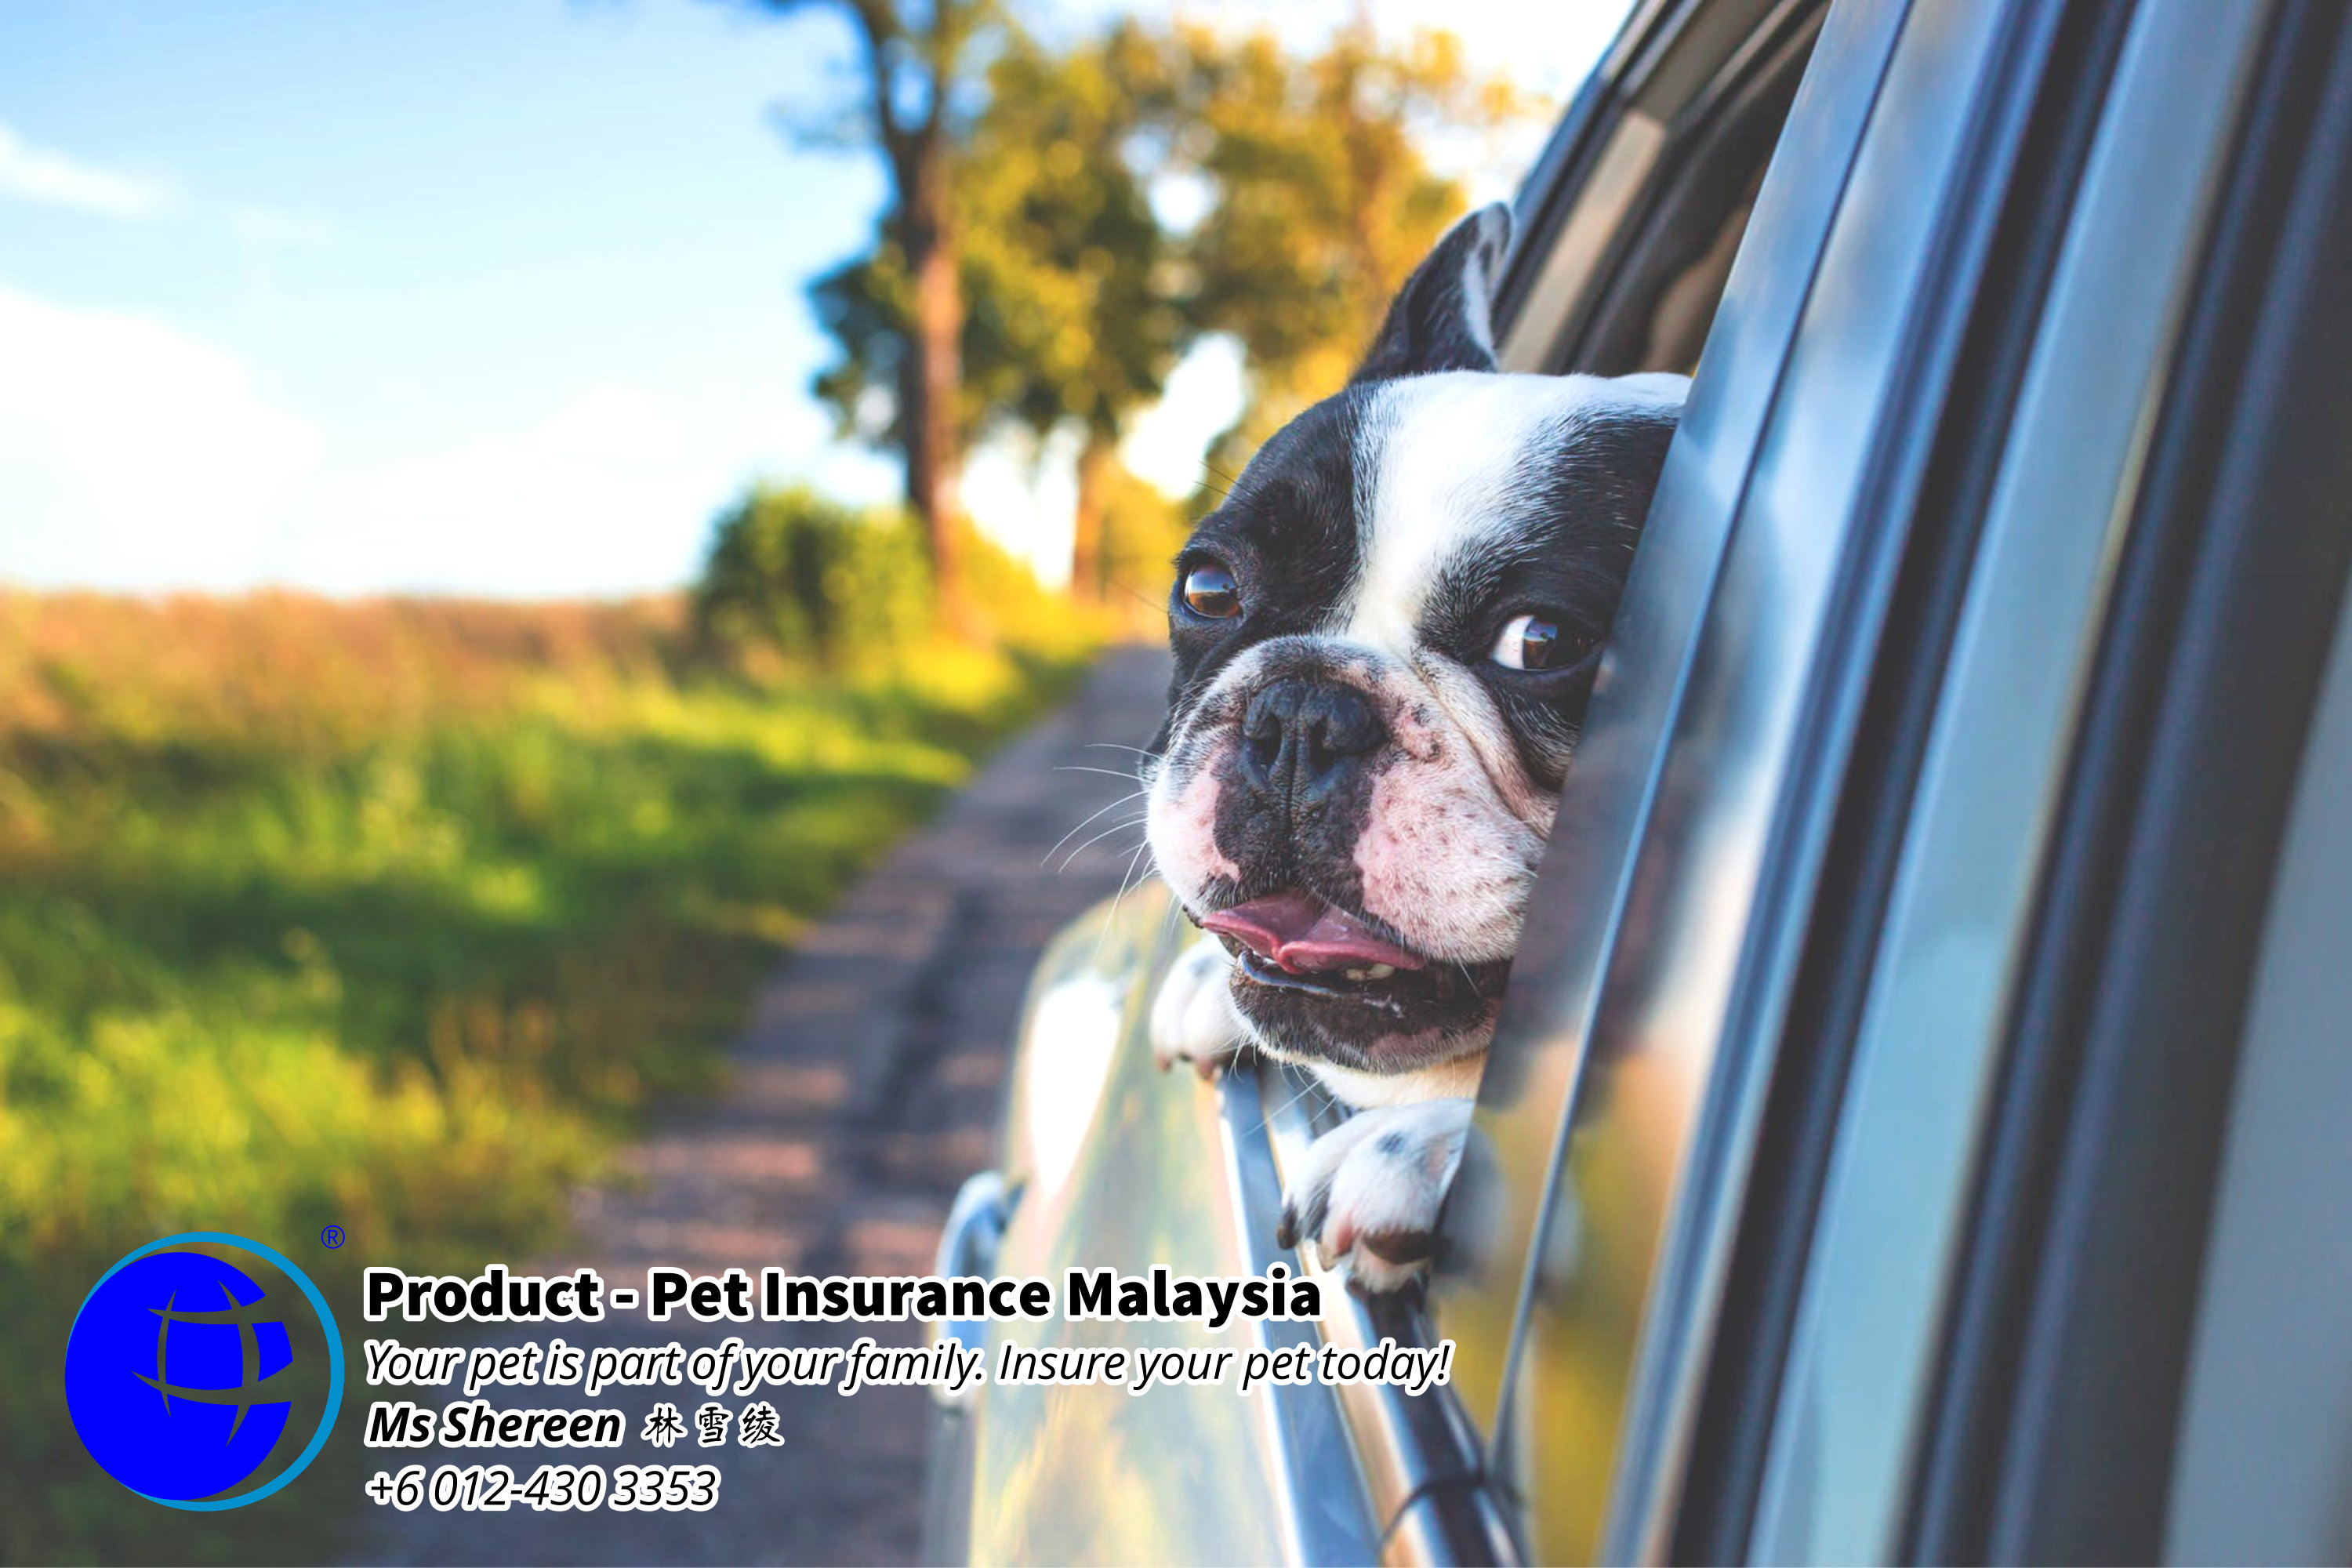 Pet Insurance Malaysia Johor Batu Pahat Agensi Pekerjaan Unilink Prospects SB Wisma V Cat Insurance Malaysia Dog Insurance Malaysia Johor Batu Pahat Your pet is part of your family Insure your pet today A19